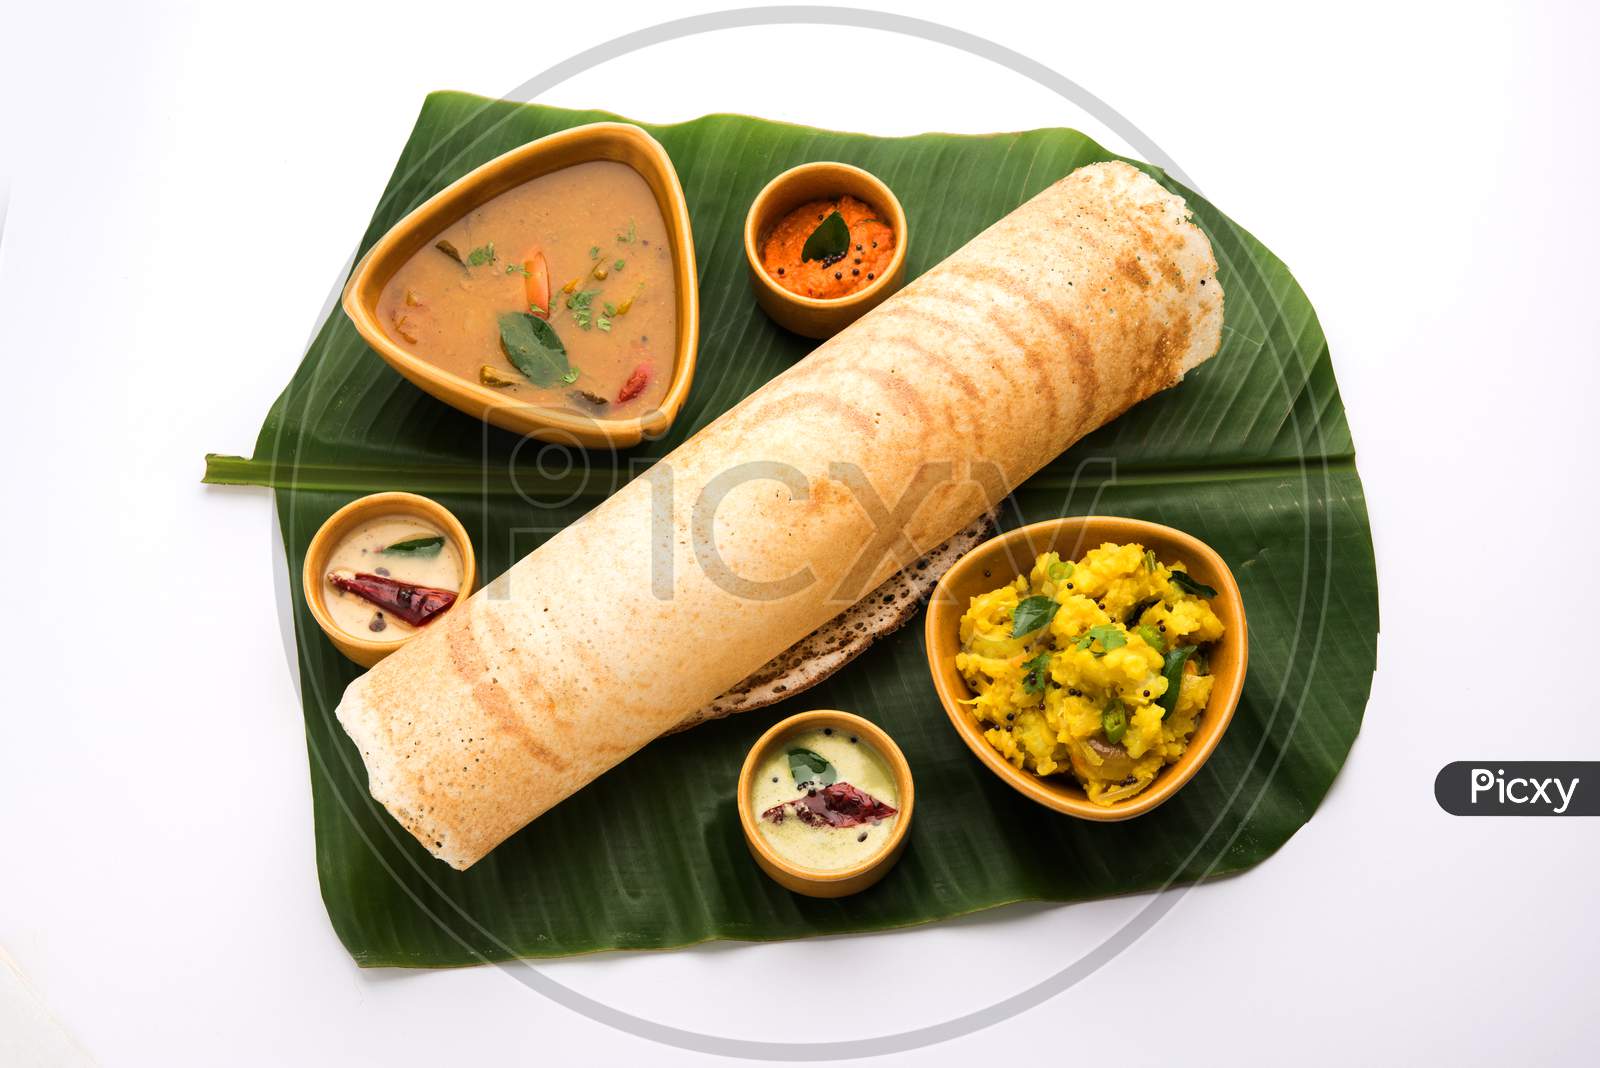 dosa in cone, triangle and roll shape